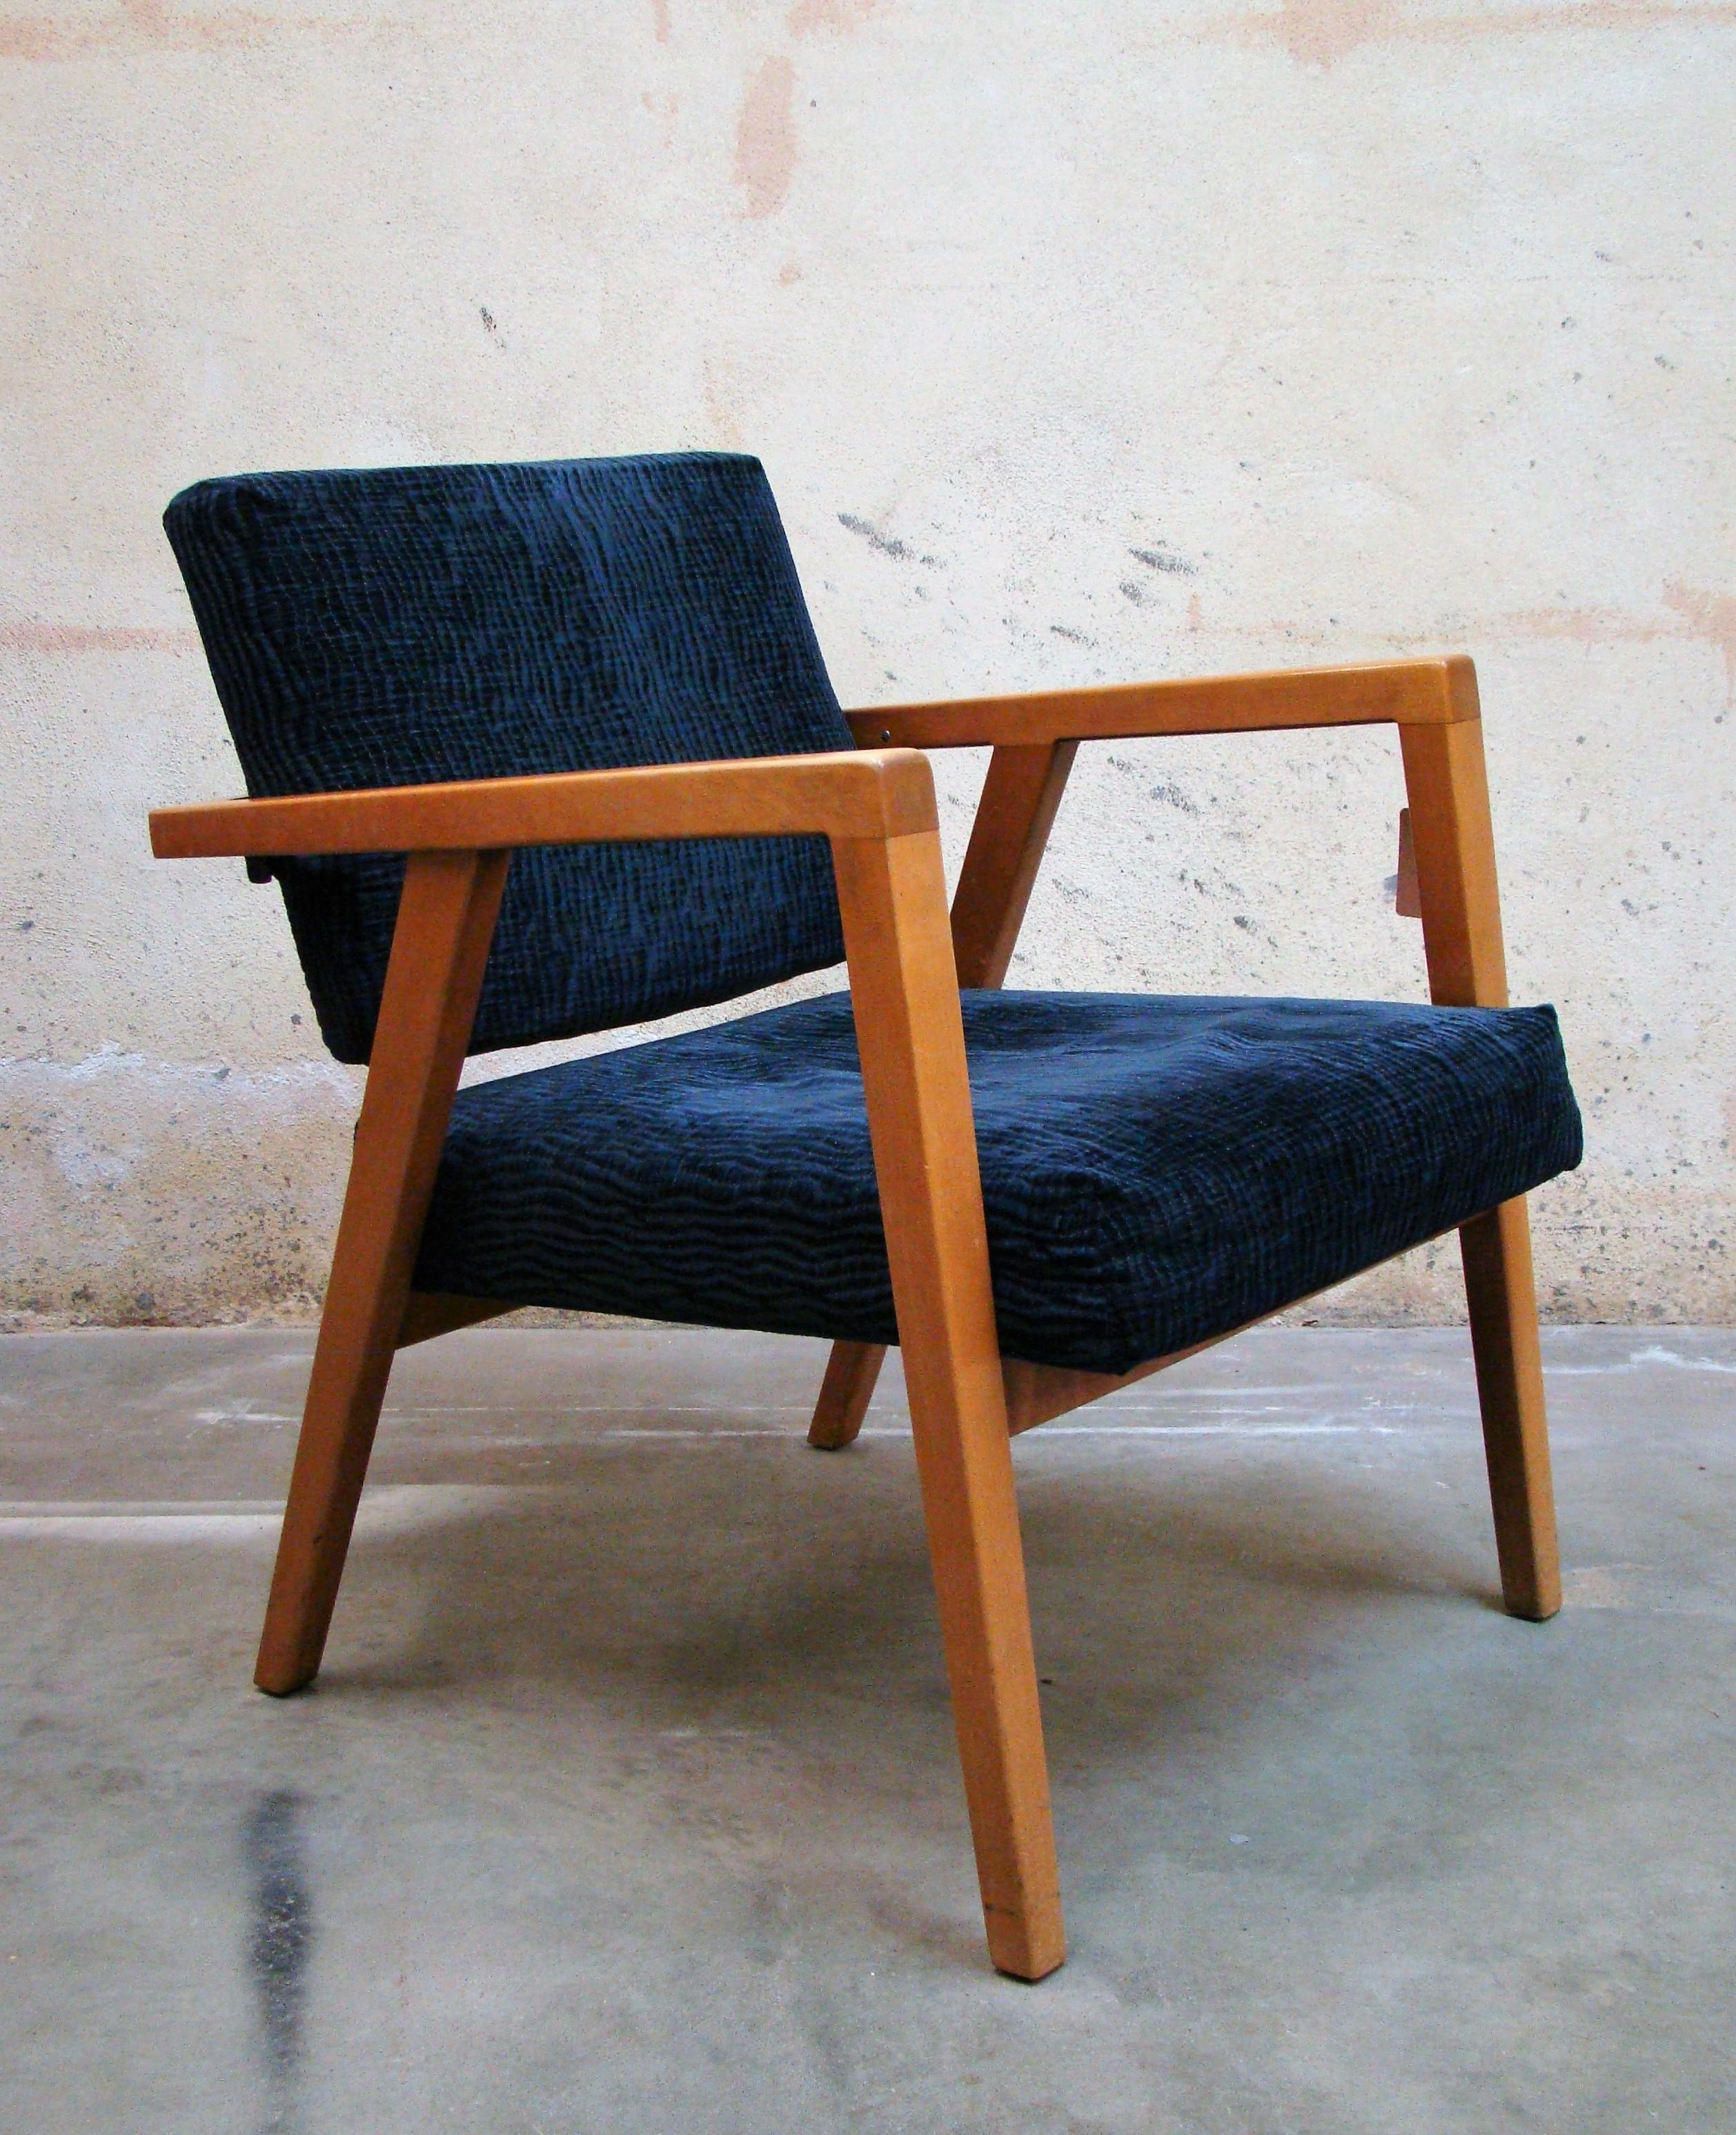 Mid-Century Modern Lounge Chair by Franco Albini for Knoll, circa 1952